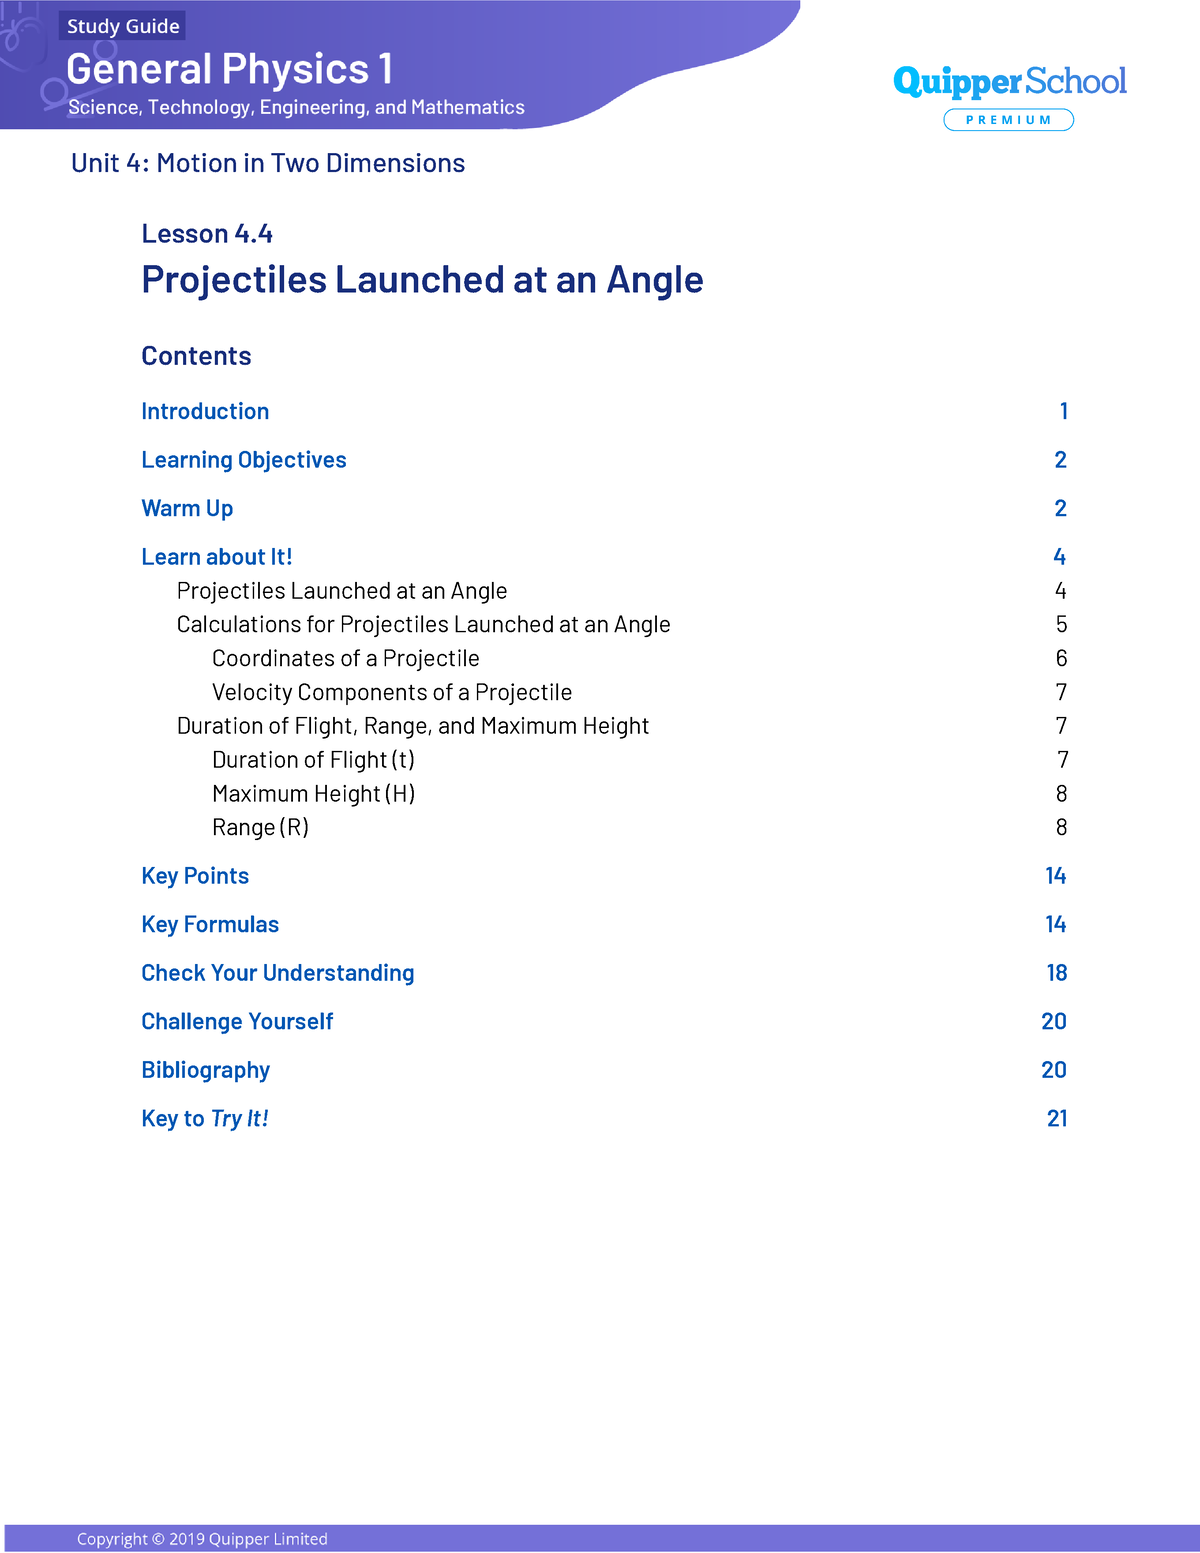 projectiles-launched-at-an-angle-projectiles-launched-at-an-angle-lesson-4-introduction